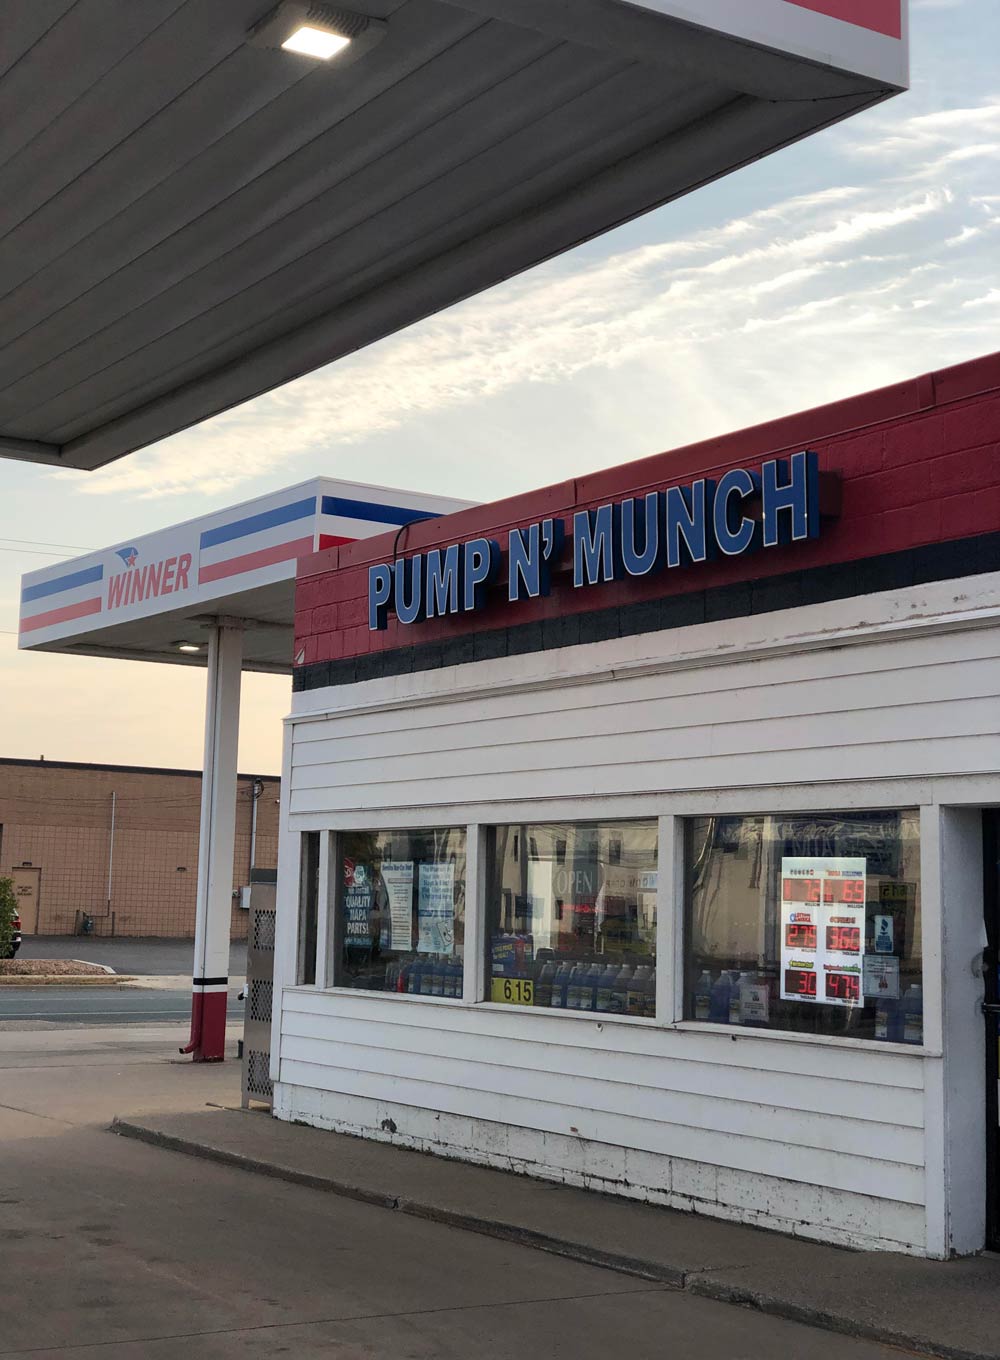 The winner of gas station names